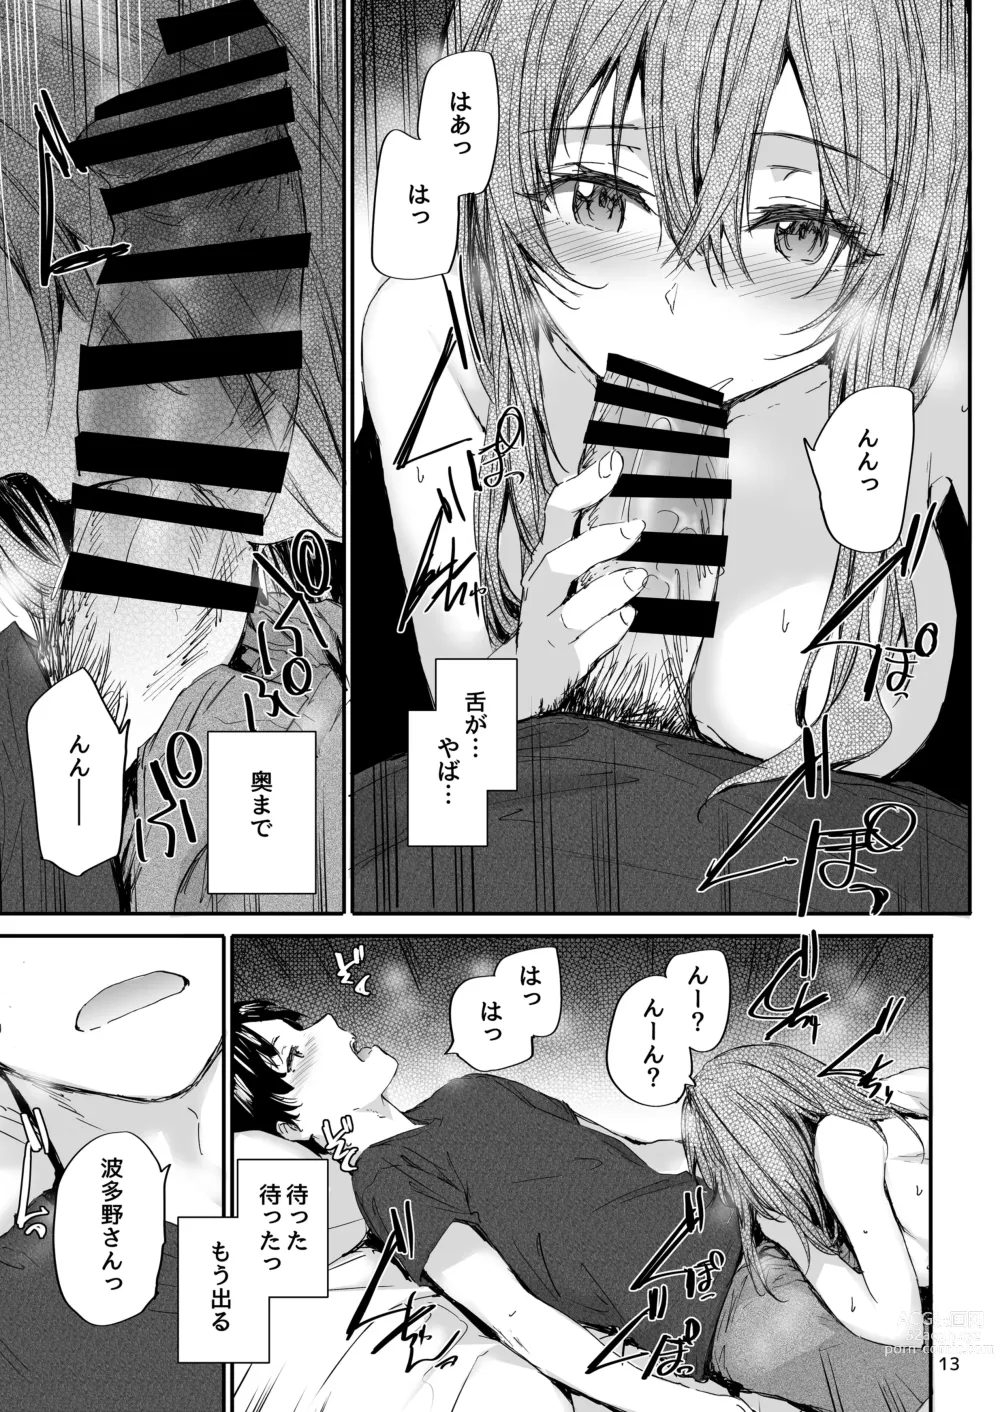 Page 14 of doujinshi Osagari Sex Friend Another 2 - Pass The Sex Friend Another  Vol. 2